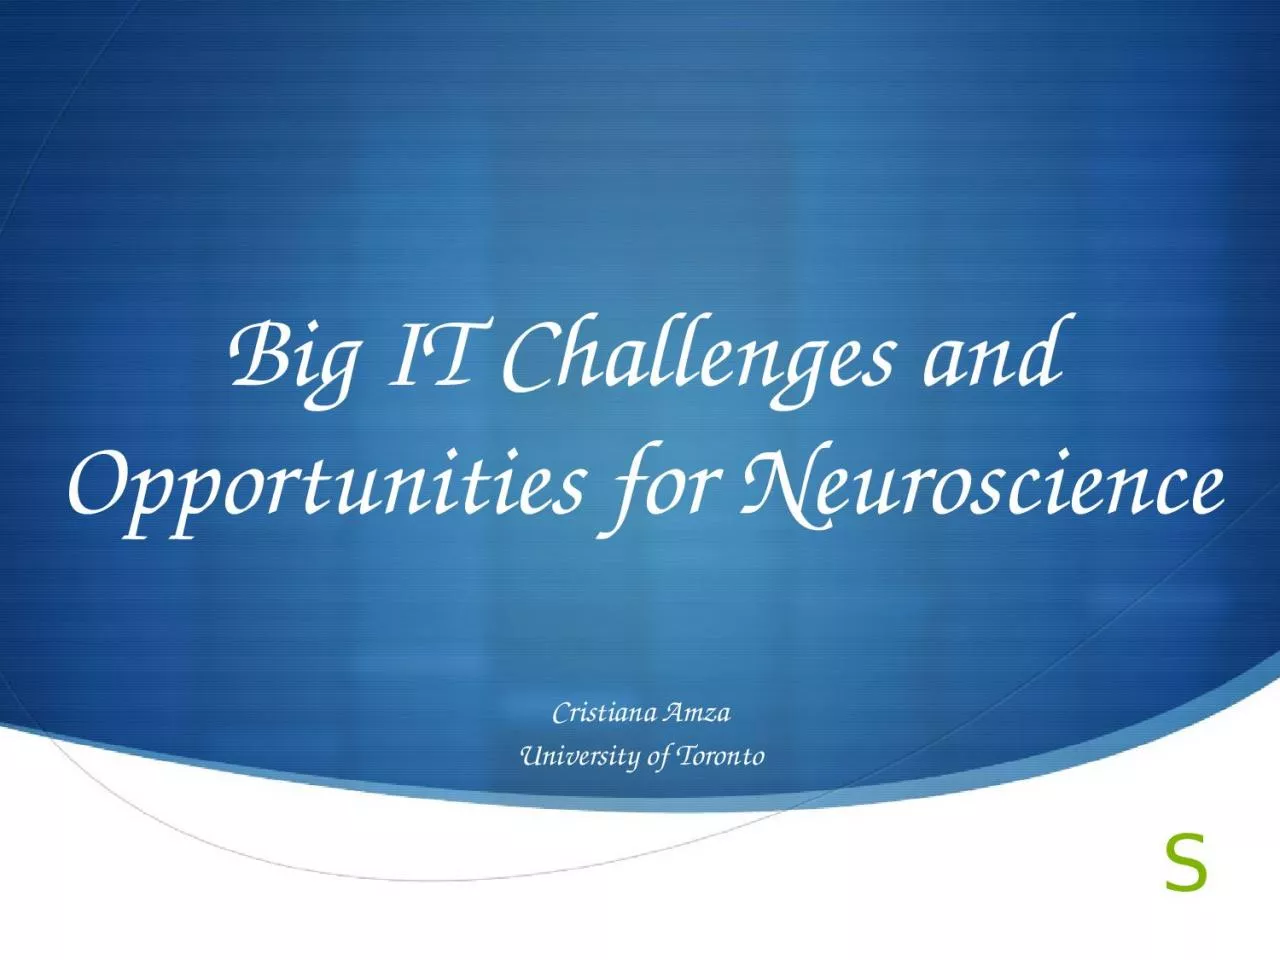 Big IT Challenges and Opportunities for Neuroscience